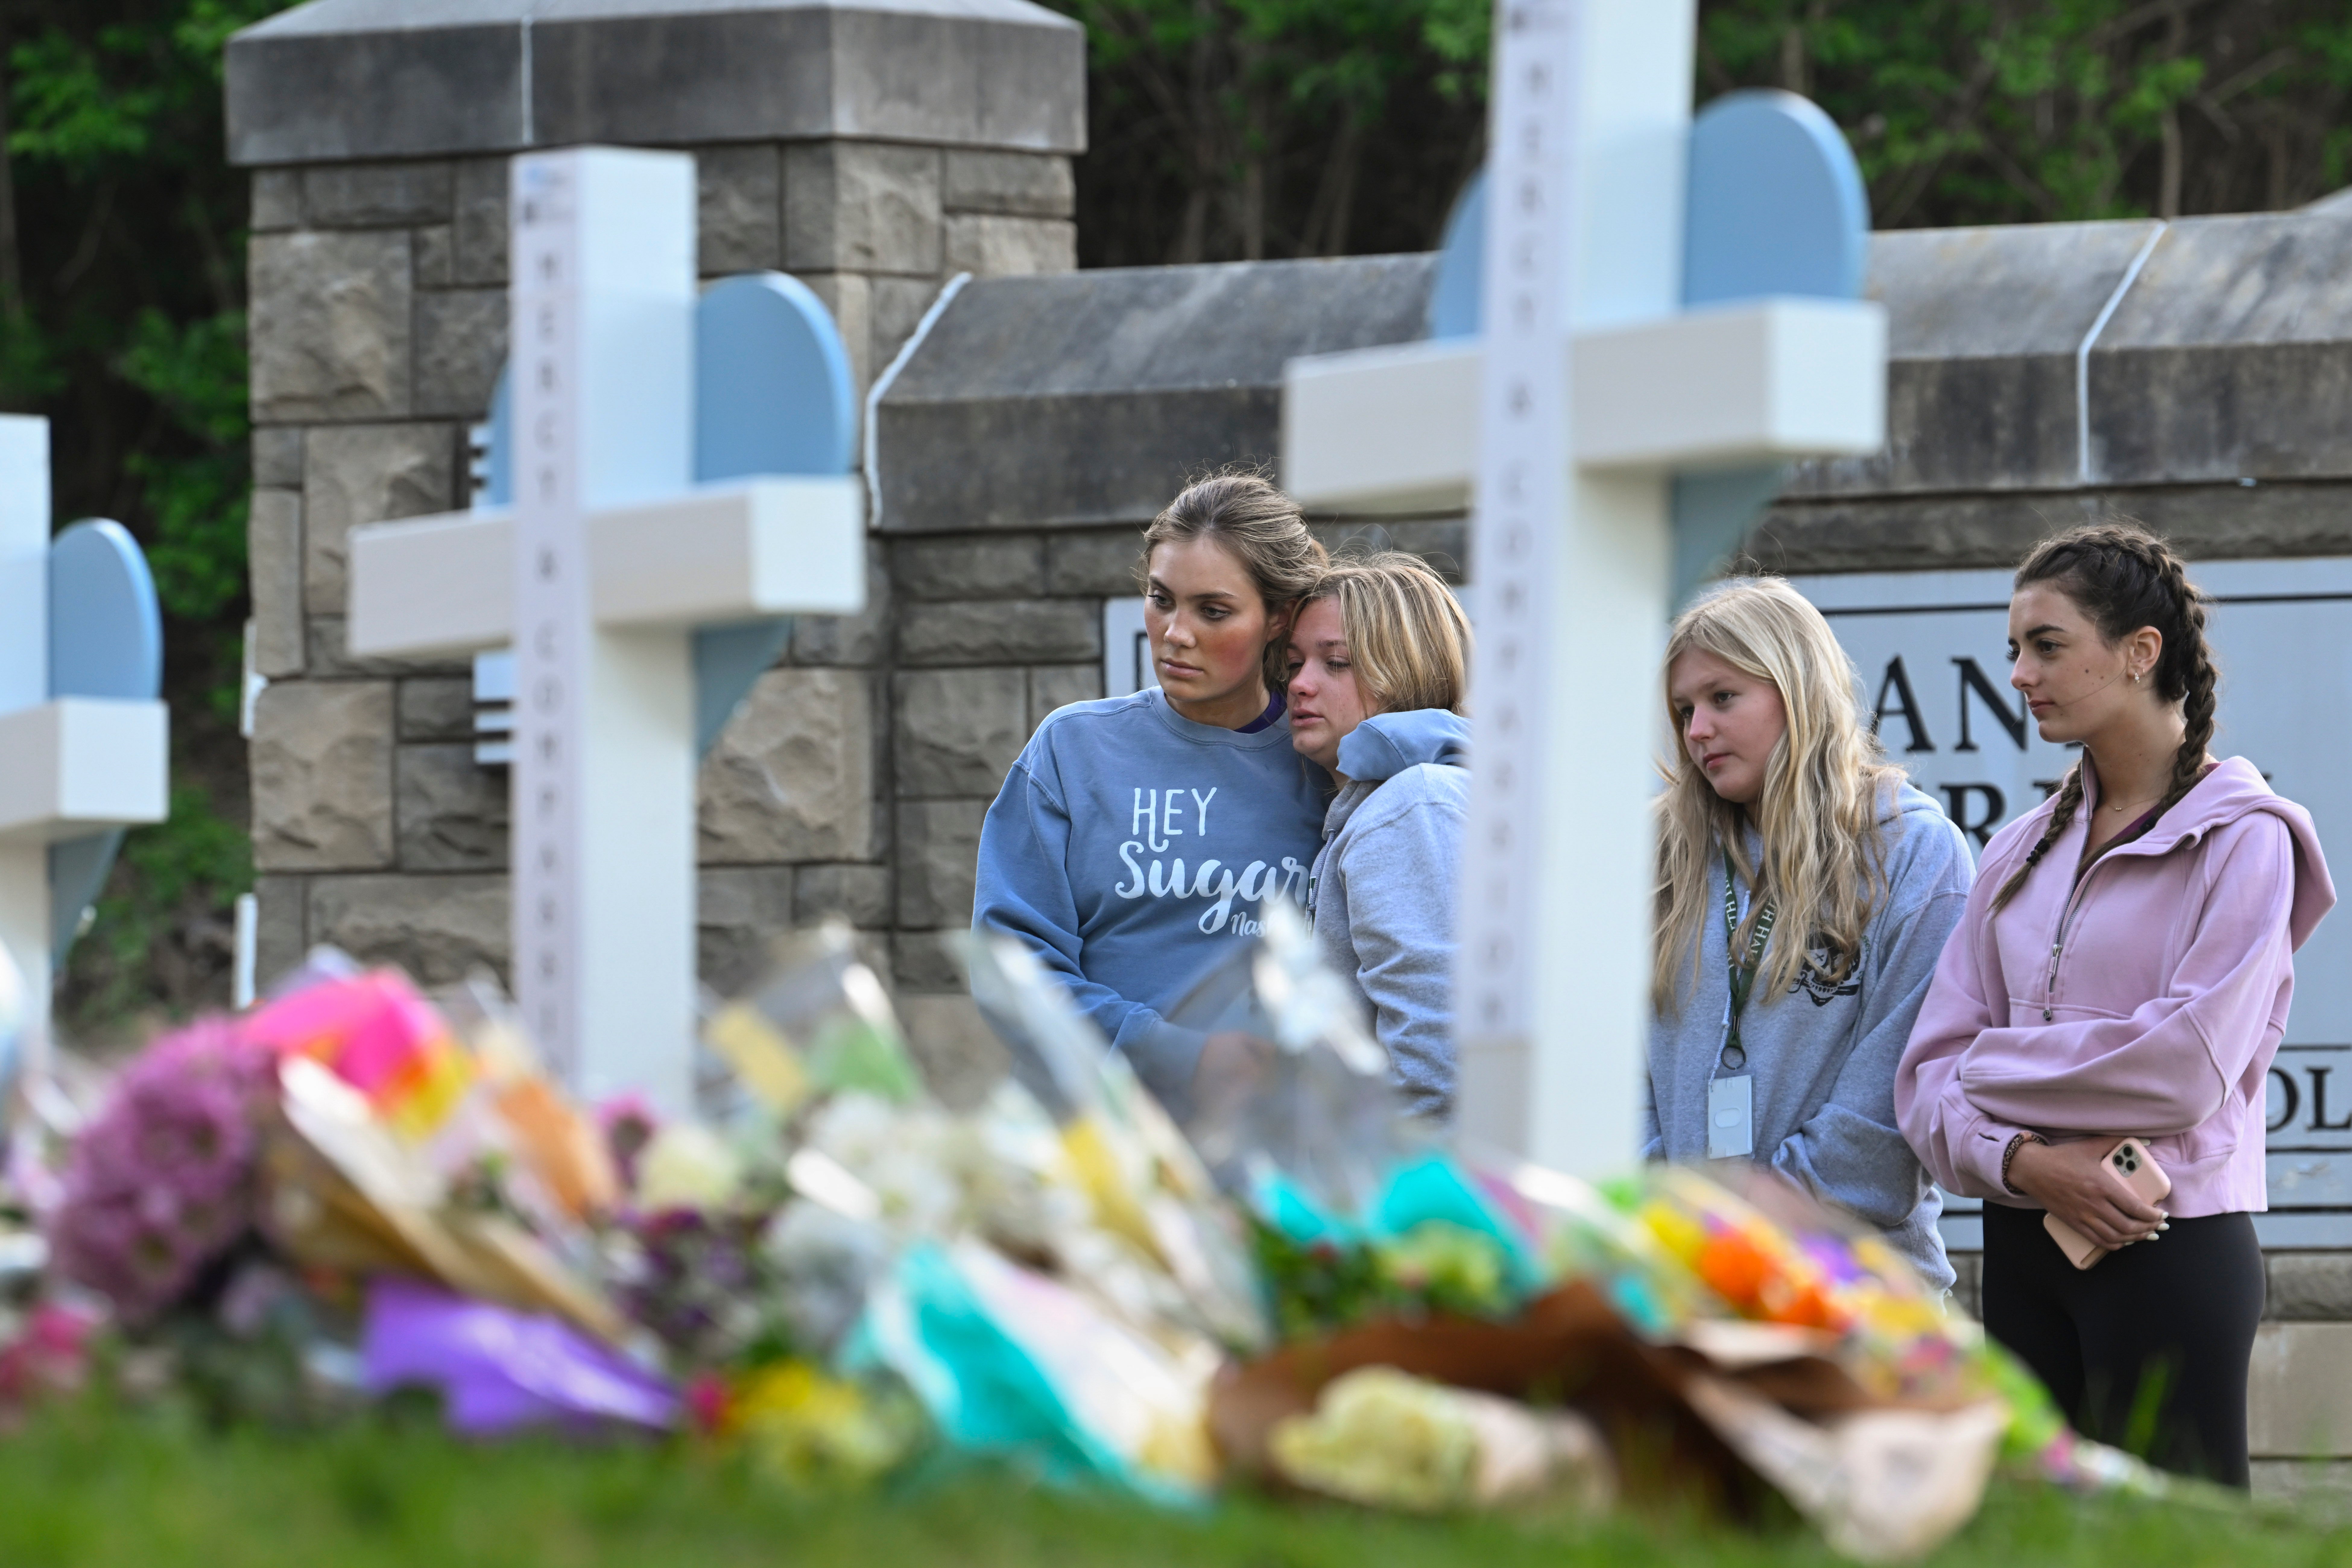 Three nine-year-olds and three adults were shot dead at Nashville’s Covenant School by a 28-year-old former student on 27 March